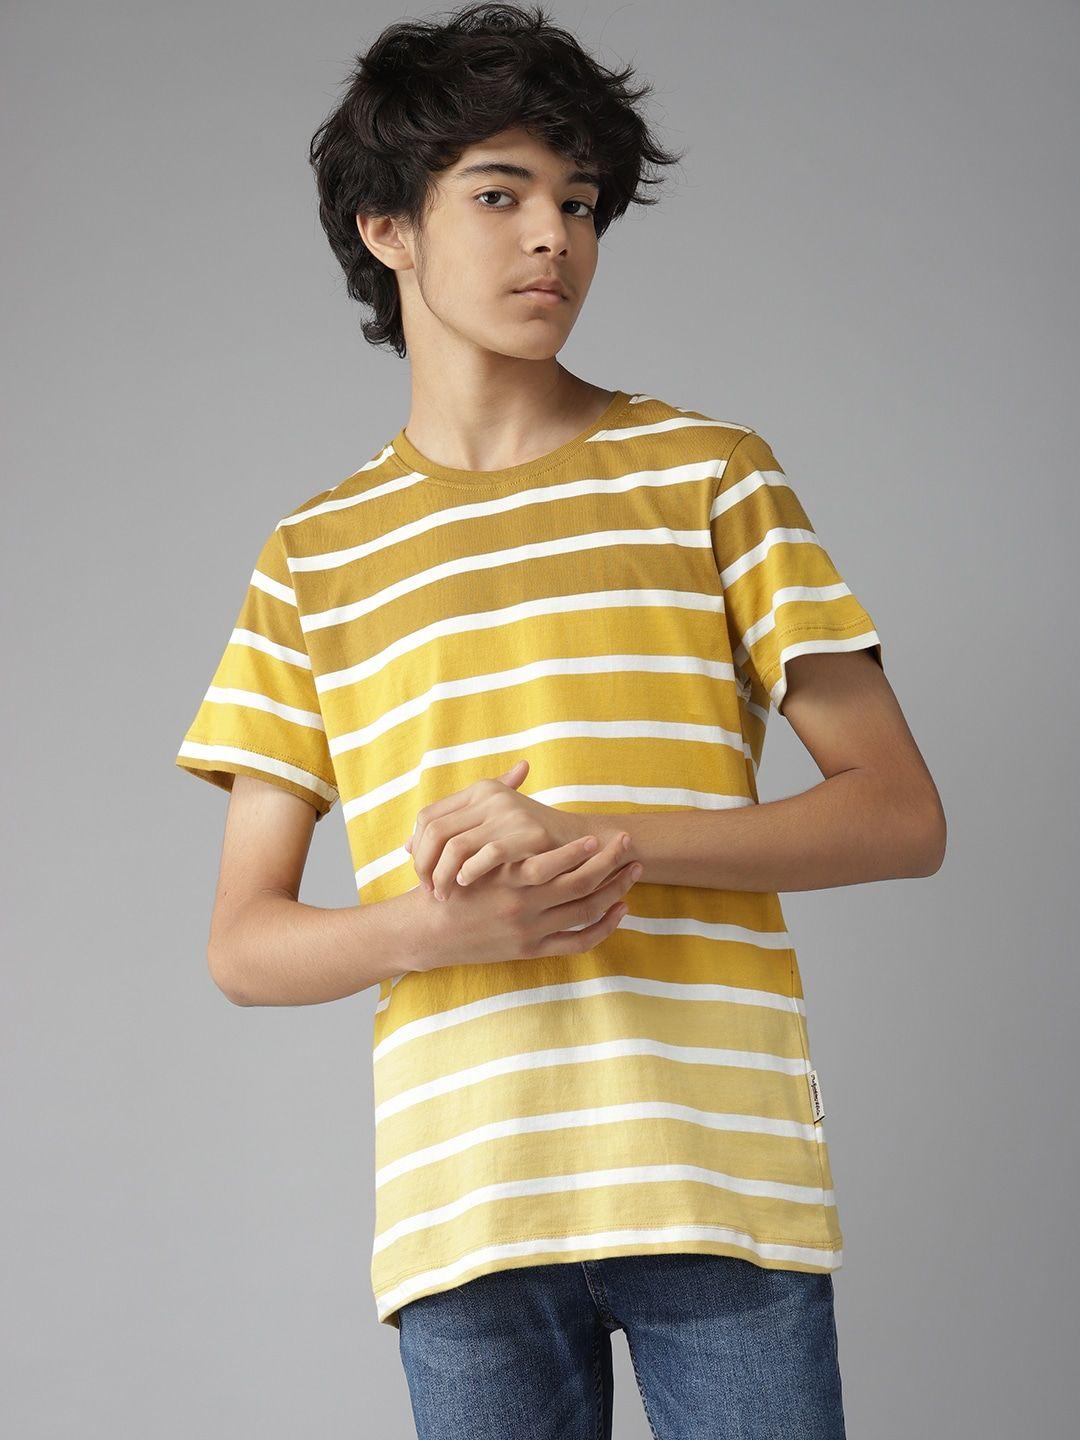 uth by roadster boys yellow & off white striped pure cotton t-shirt